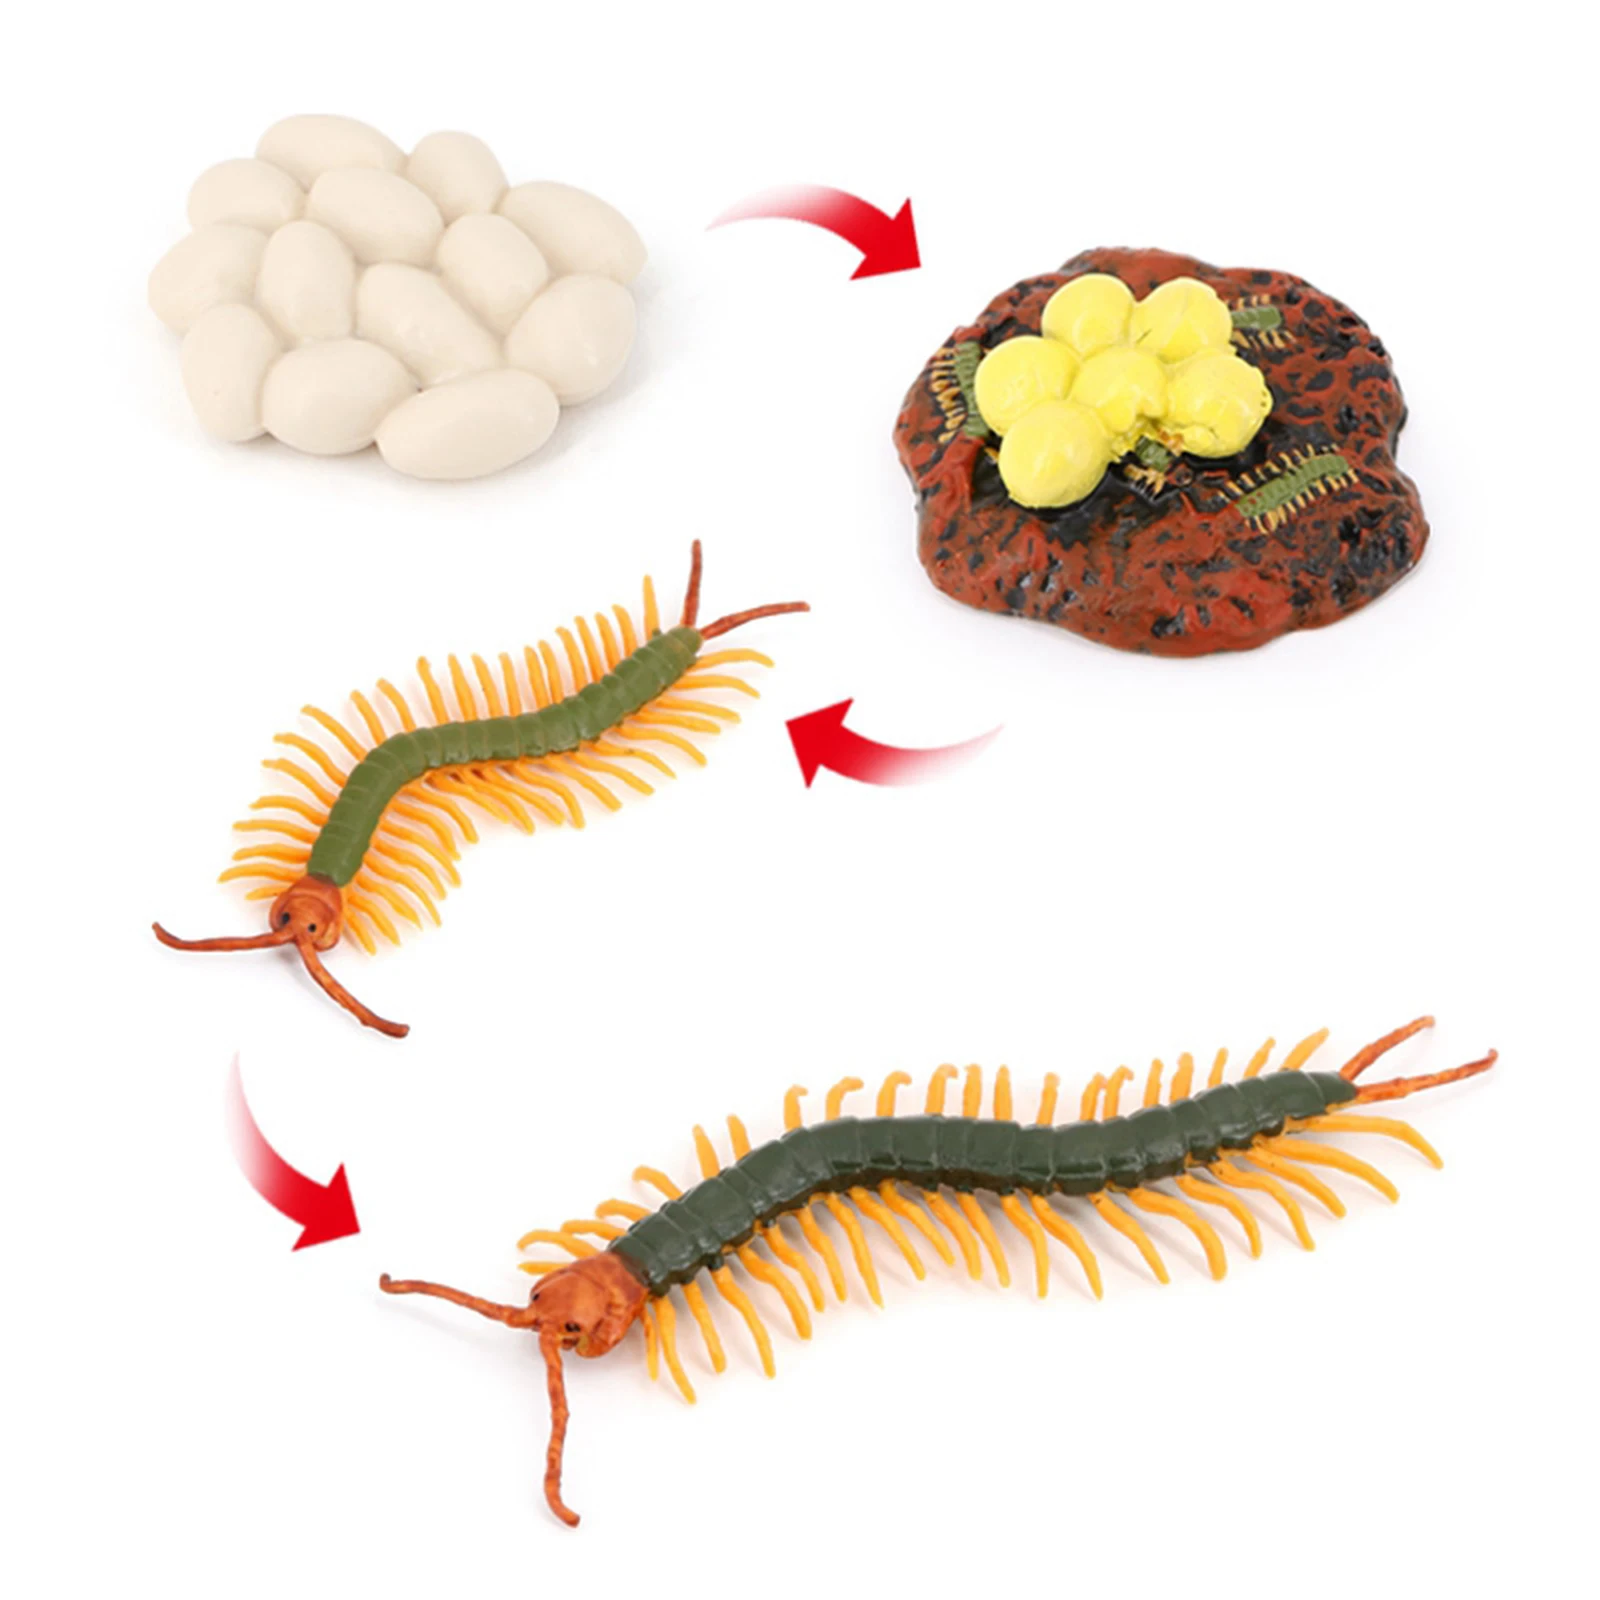 4 Stages Life Cycle of Centipede Nature Insects Life Cycles Growth Model Game Prop Insect Animal Natural Toy